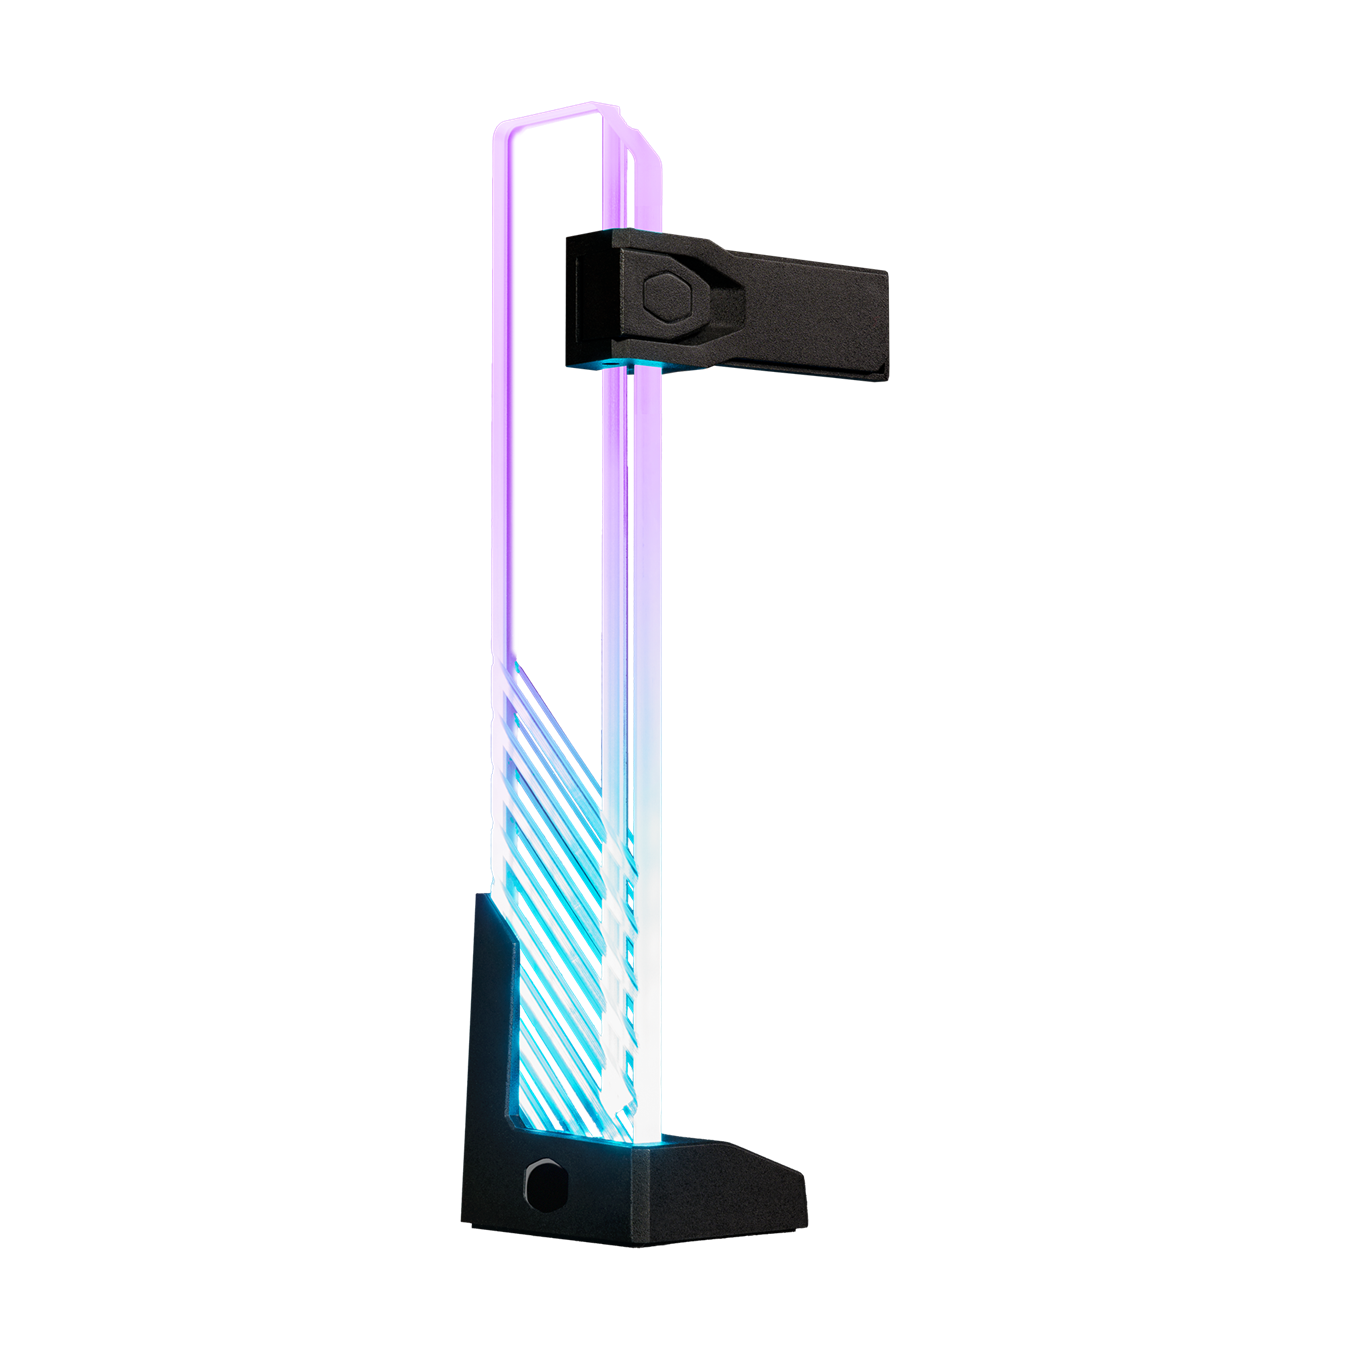 The MasterAccessoryARGB GPU Support Bracket utilizes the strength and aesthetic of tempered glass in completely new ways.